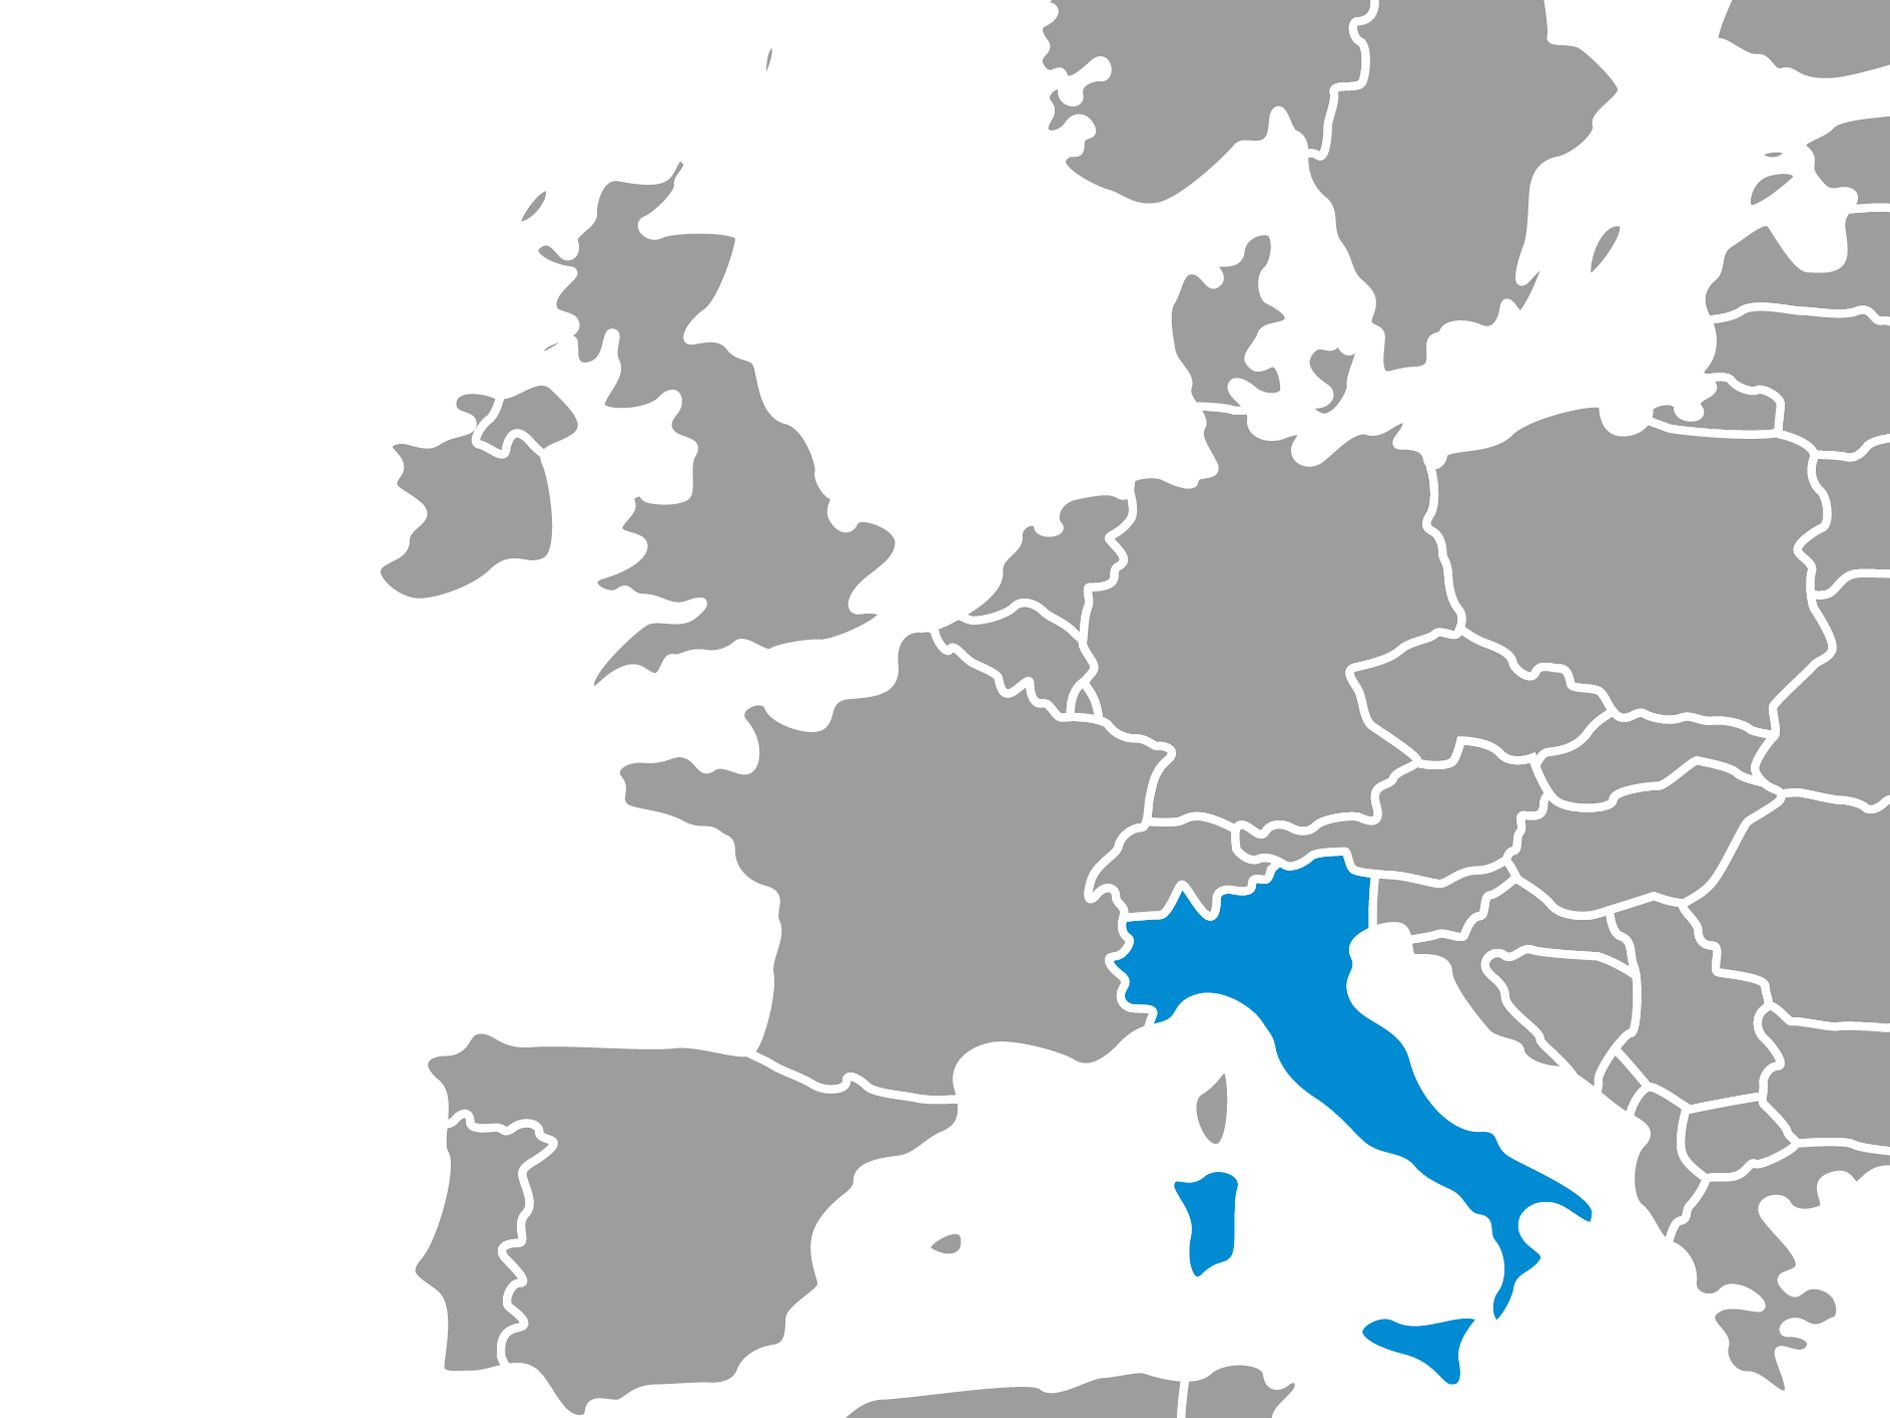 Map with focus on Italy